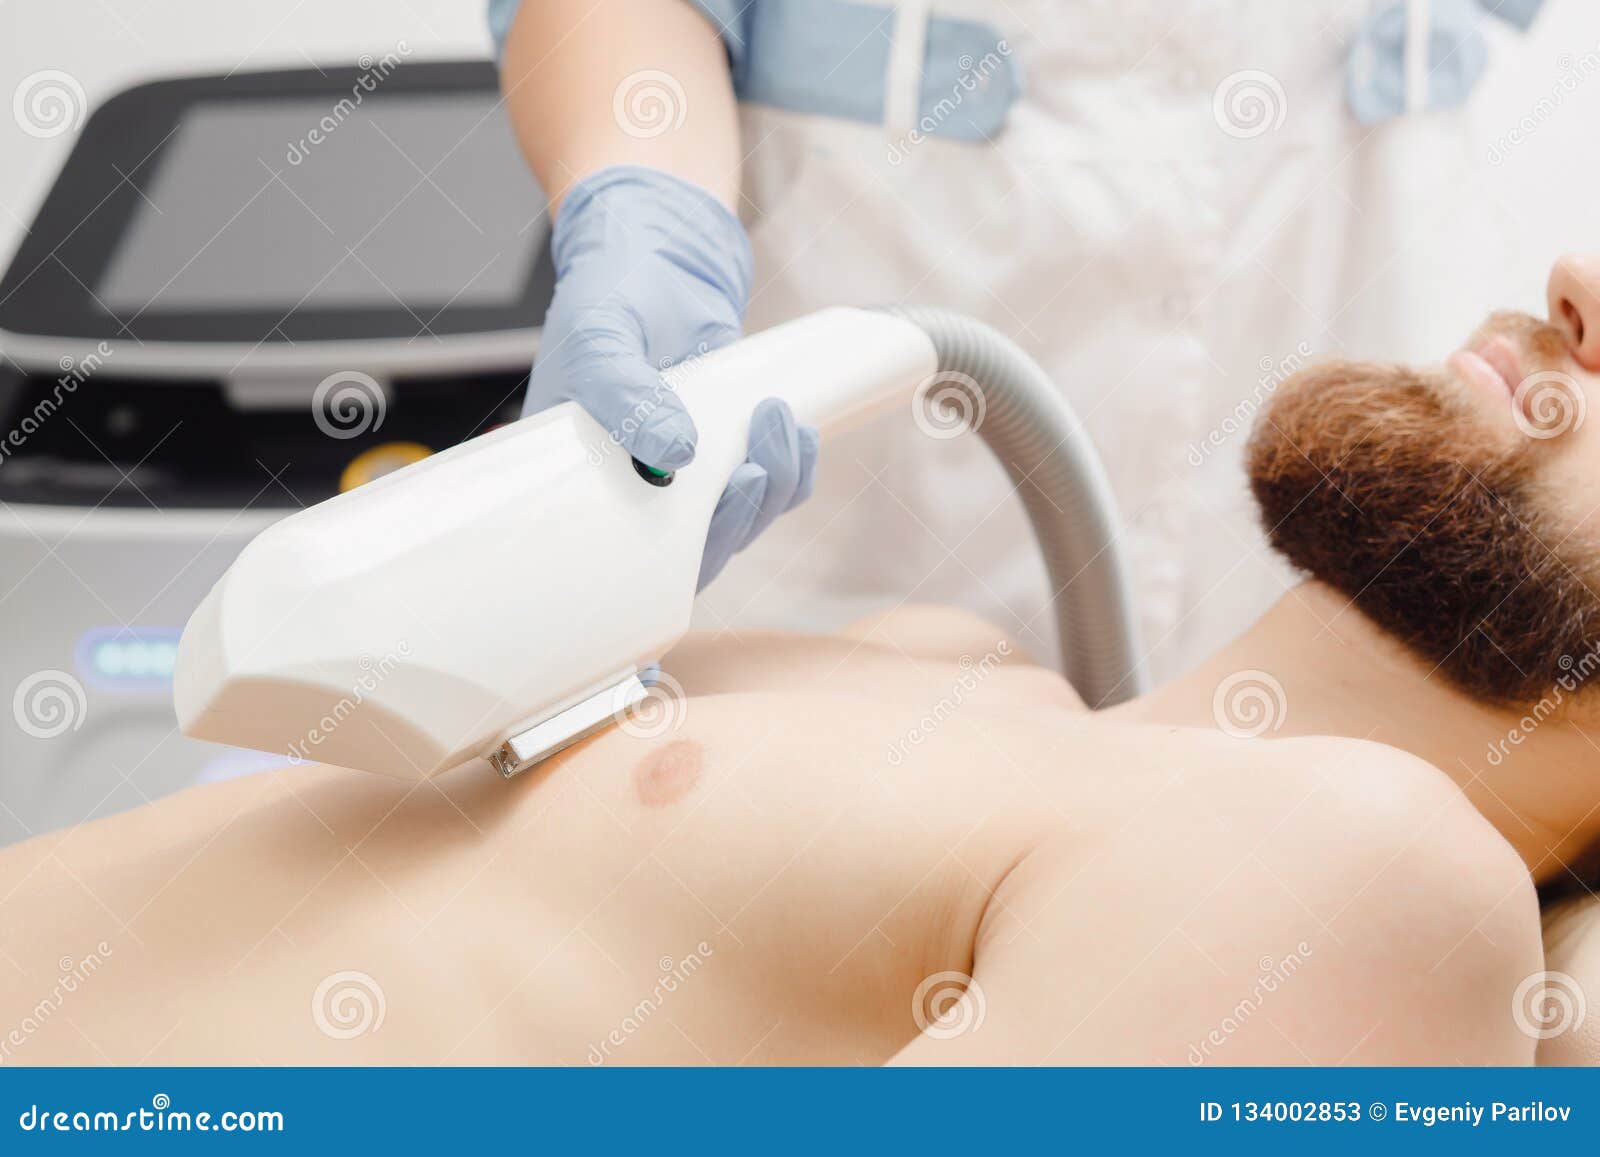 Male Procedure To Remove Hair from Breast with Help of Special Laser  Equipment. Concept Beauty and Health Stock Image - Image of people,  cosmetic: 134002853